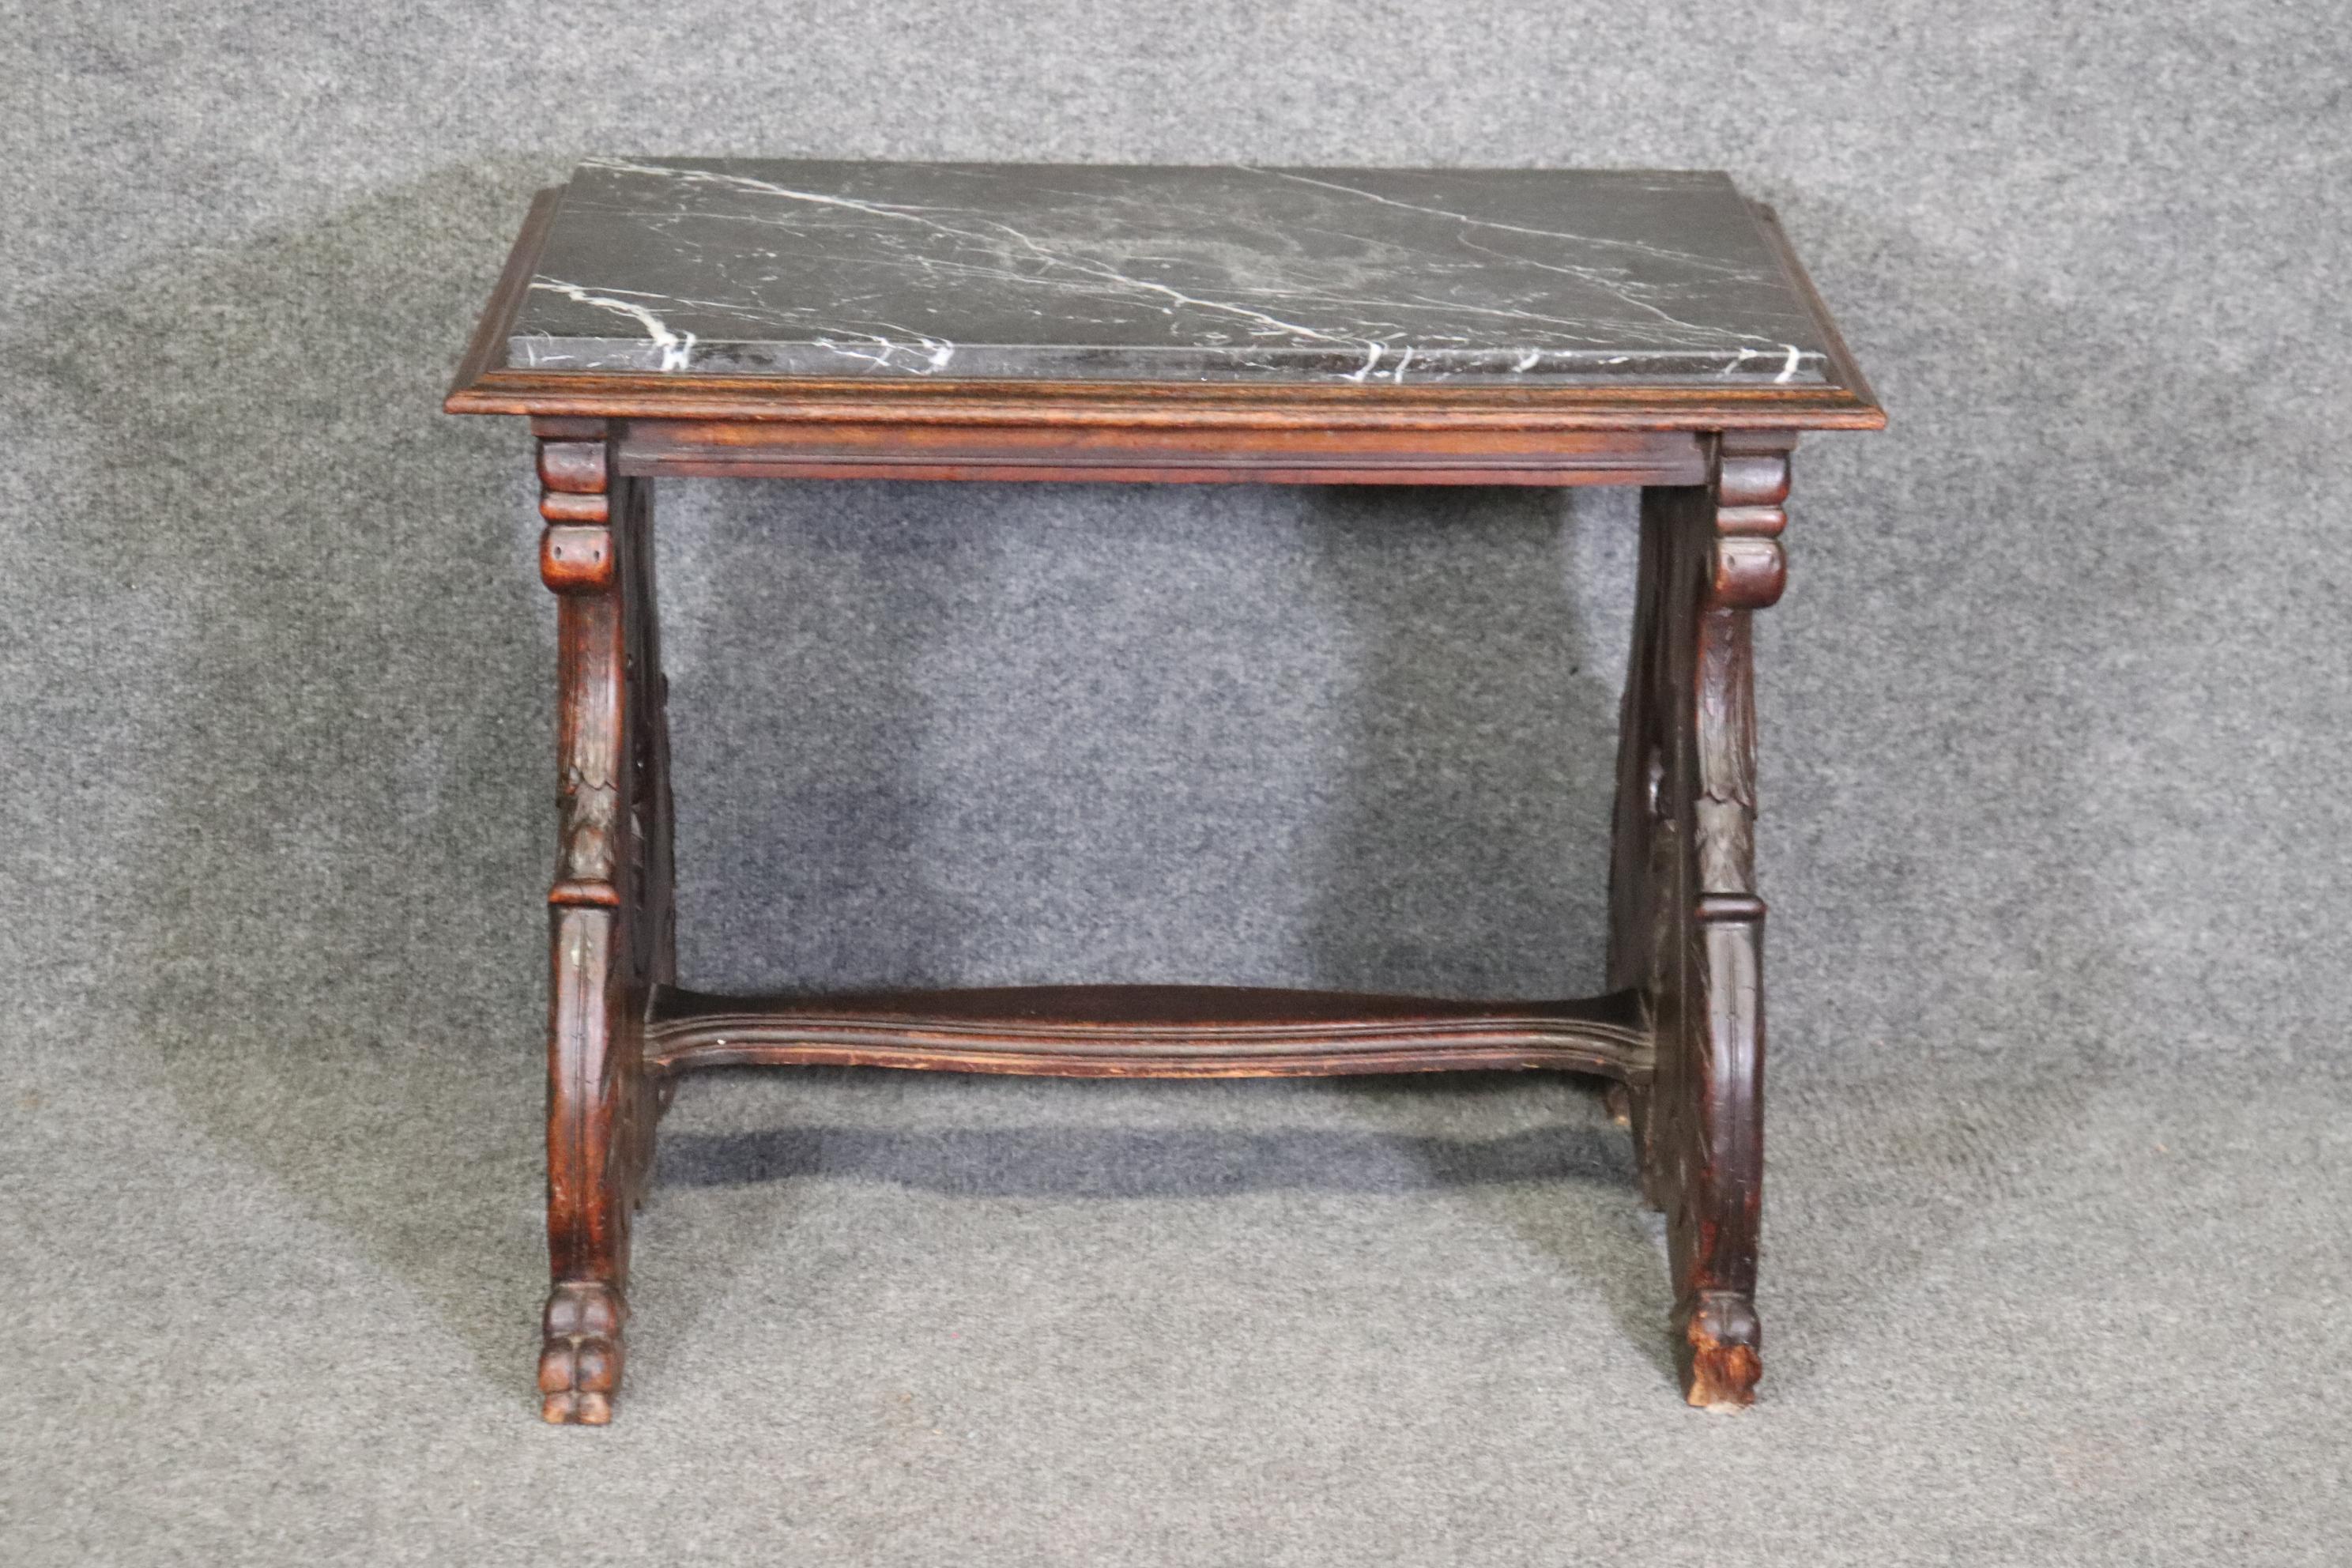 Dimensions- H: 20in W: 25 1/4in D: 17 1/2in 

This Belgian antique 19th Century marble top accent table is made of the highest quality!  If you look at the photos provided, you can see the detail in the griffins or birds on each end of the table as